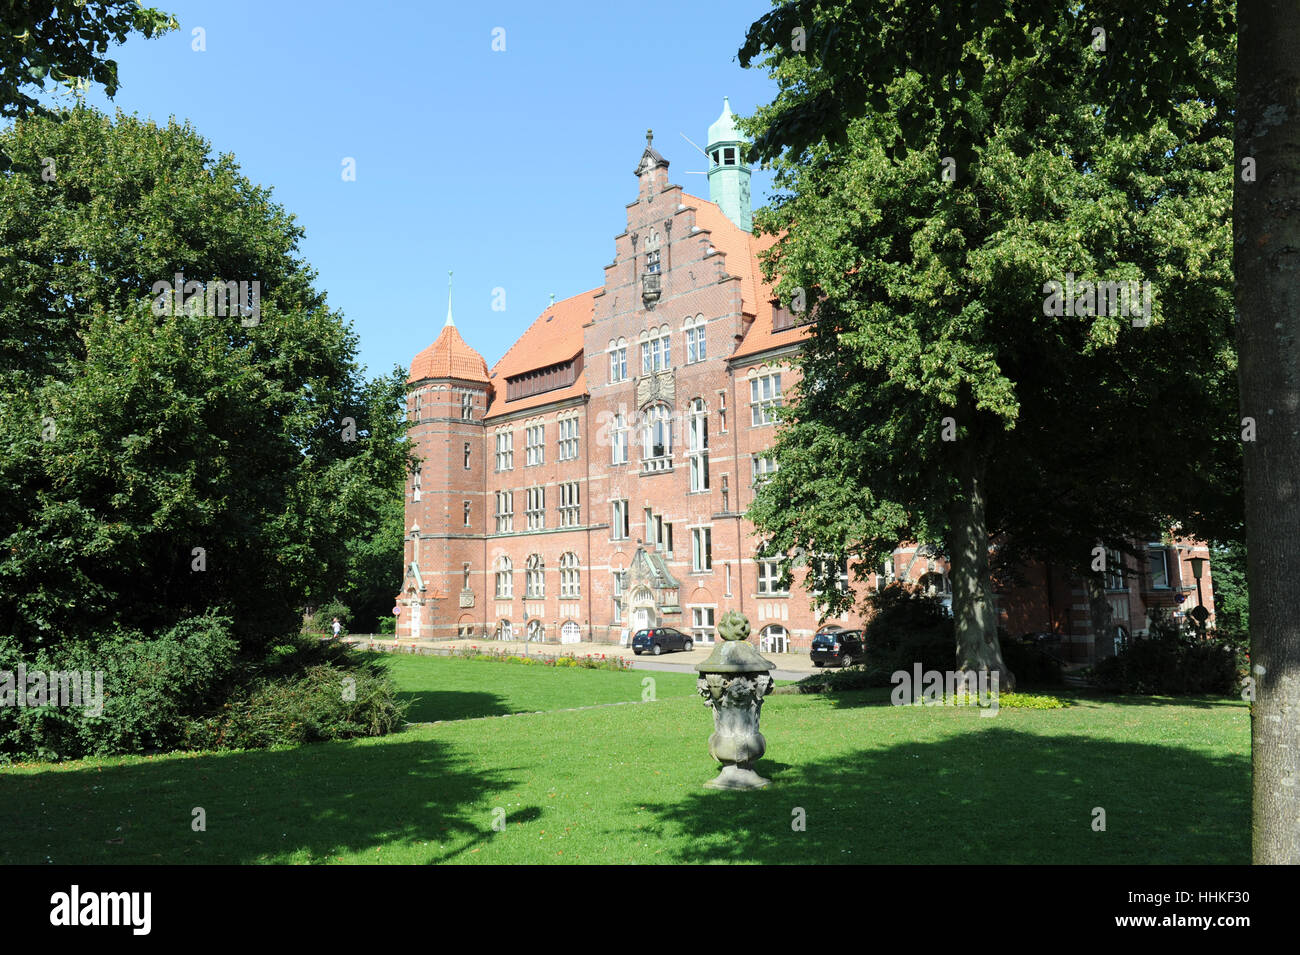 sightseeing, museum, building of historic importance, hill, park, sights, Stock Photo